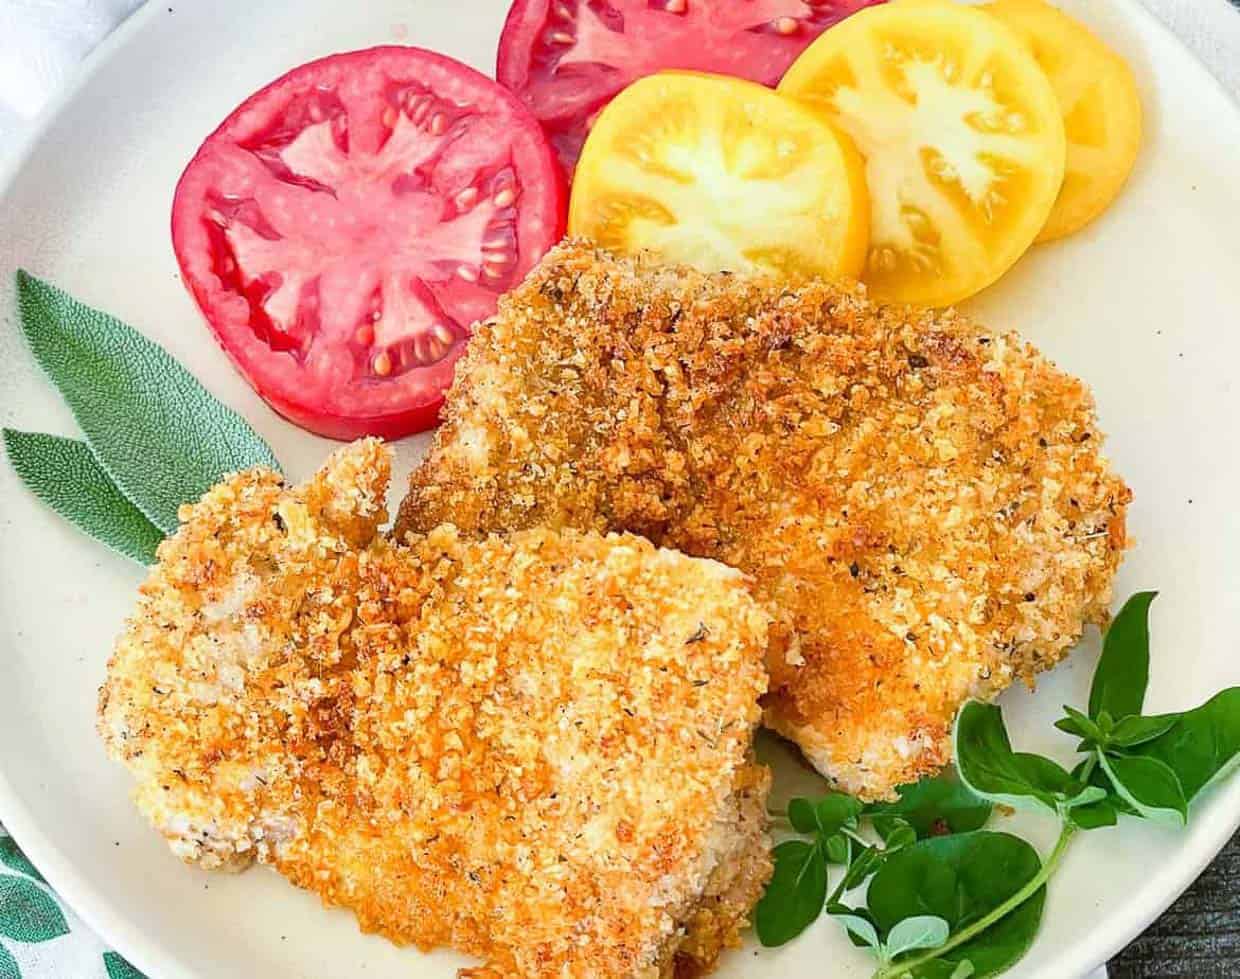 Panko chicken on a plate with tomato slices and fresh herbs.